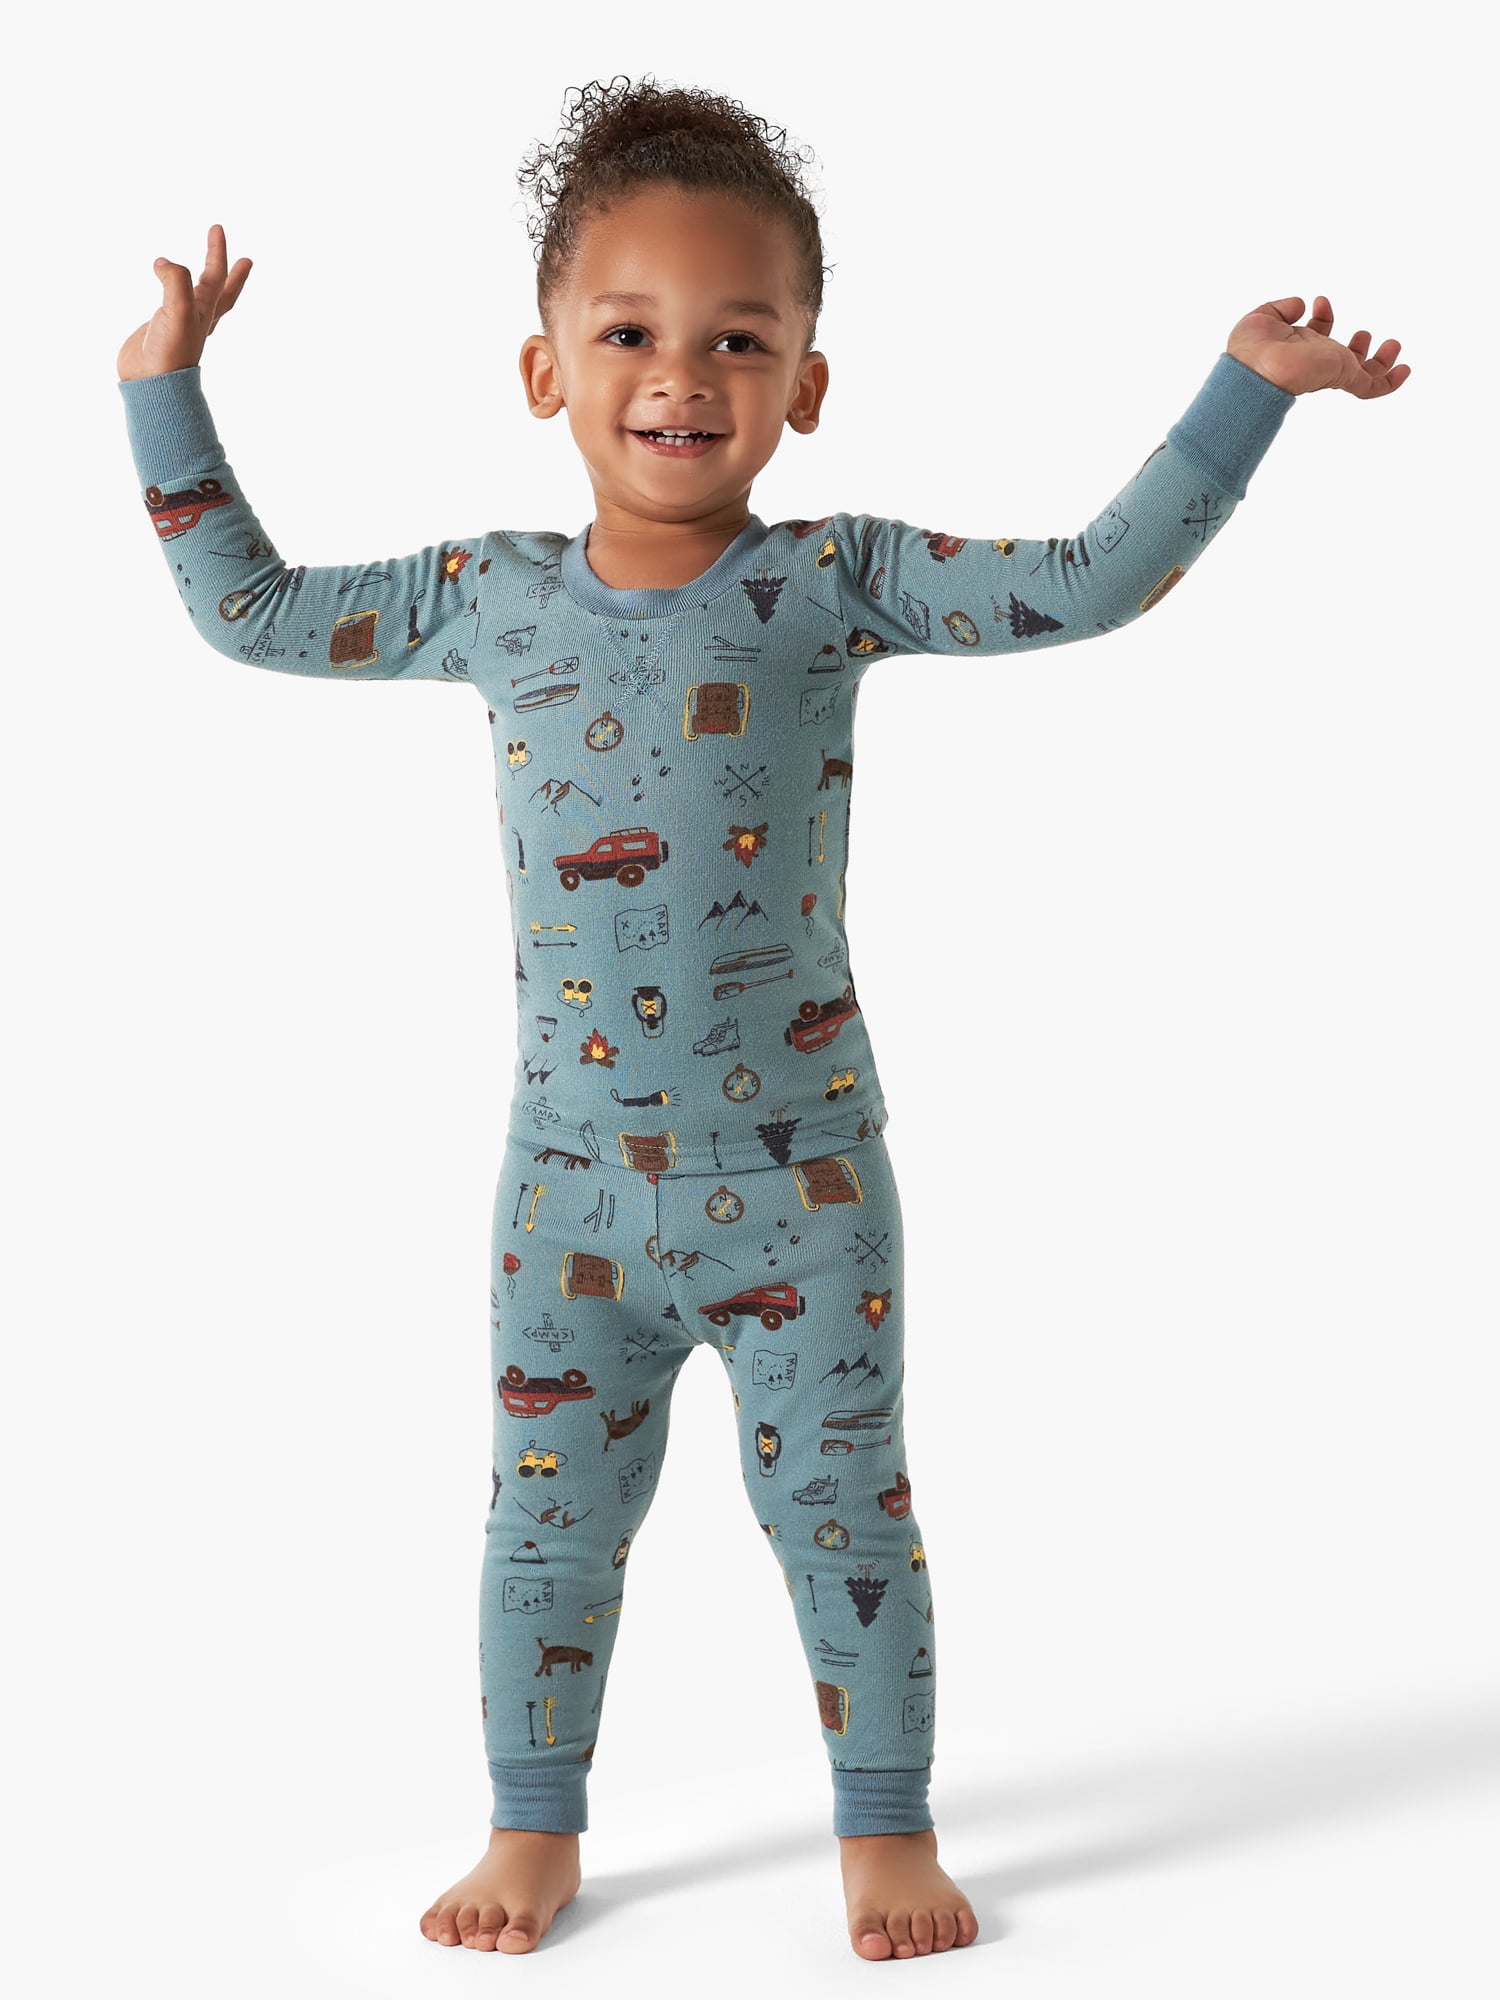 Modern Moments by Gerber Toddler Boy Tight Fitting Pajamas Set, 2-Piece,  Sizes 12M-5T 